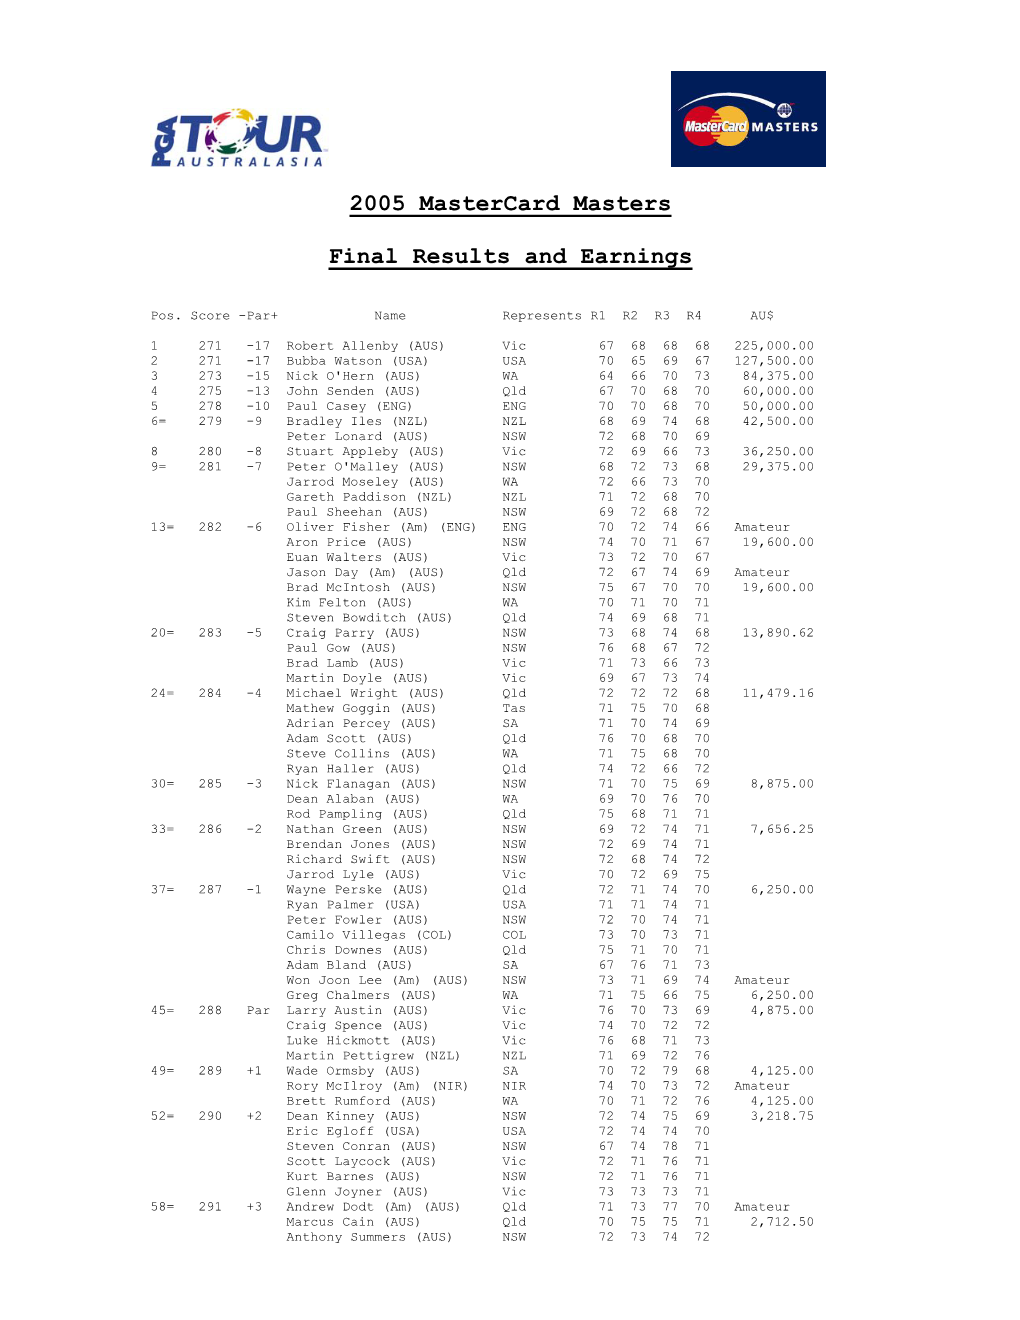 2005 Mastercard Masters Final Results and Earnings